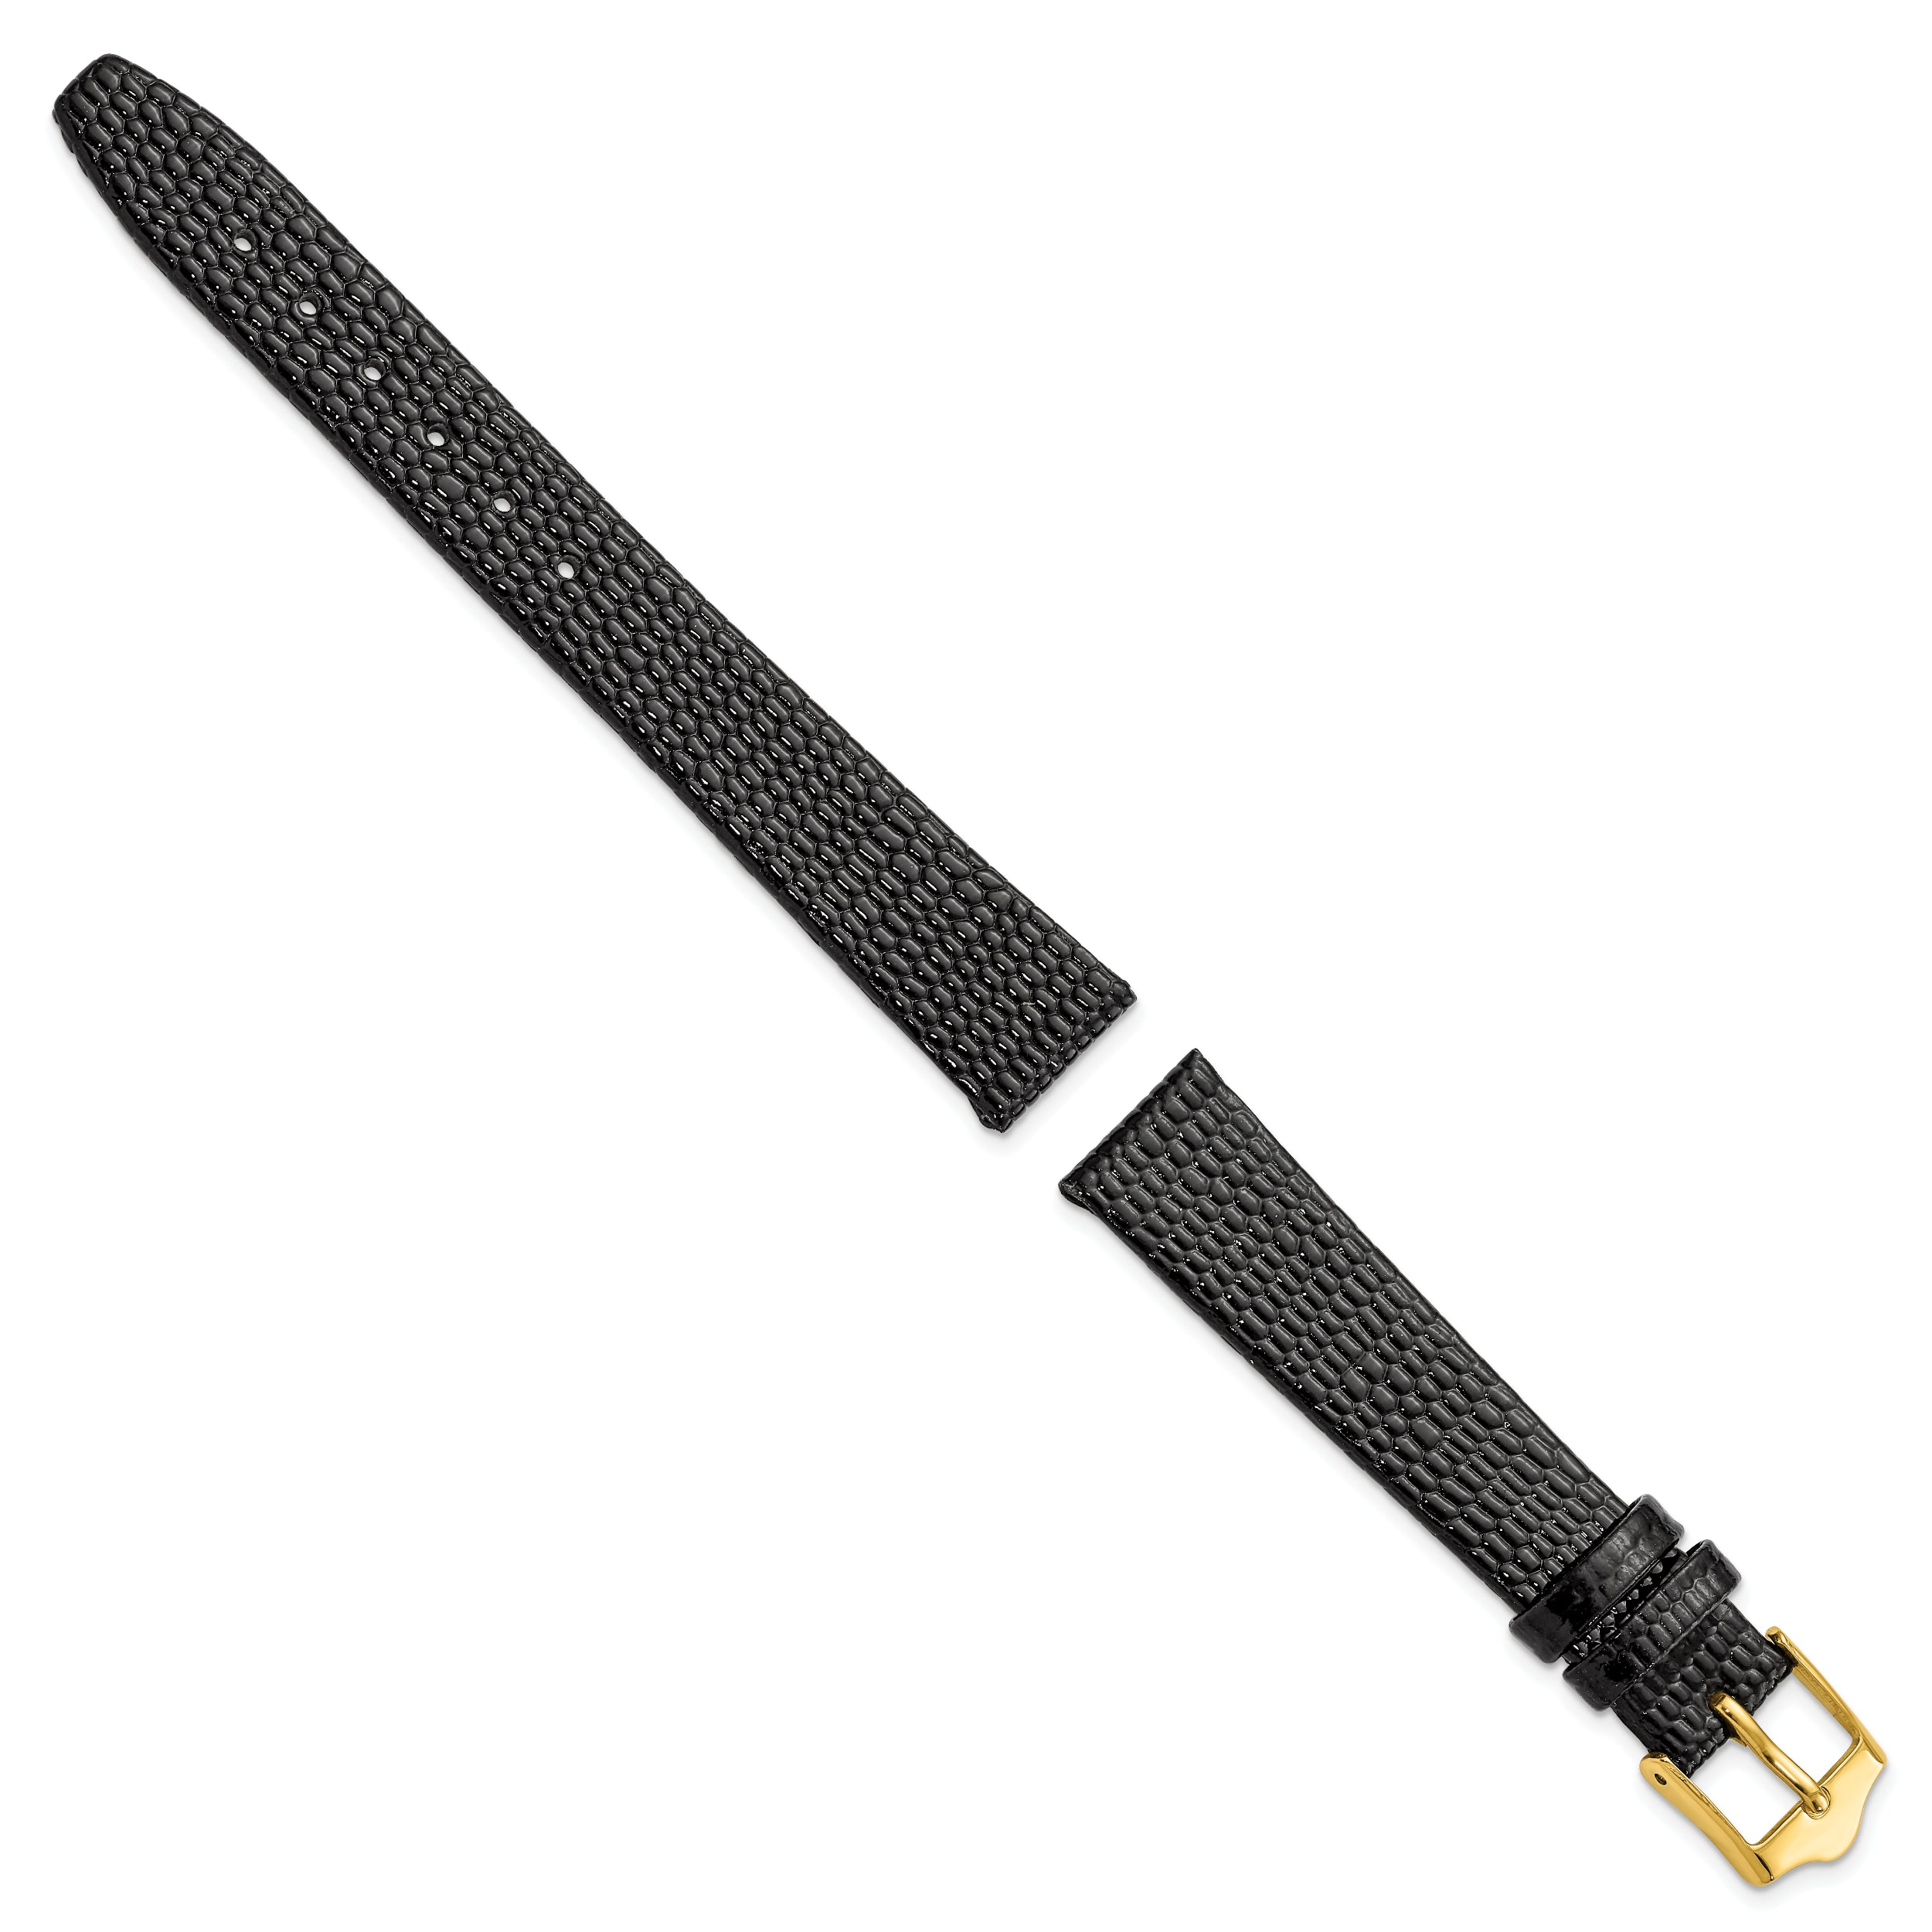 12mm Flat Black Lizard Grain Leather with Gold-tone Buckle 6.75 inch Watch Band